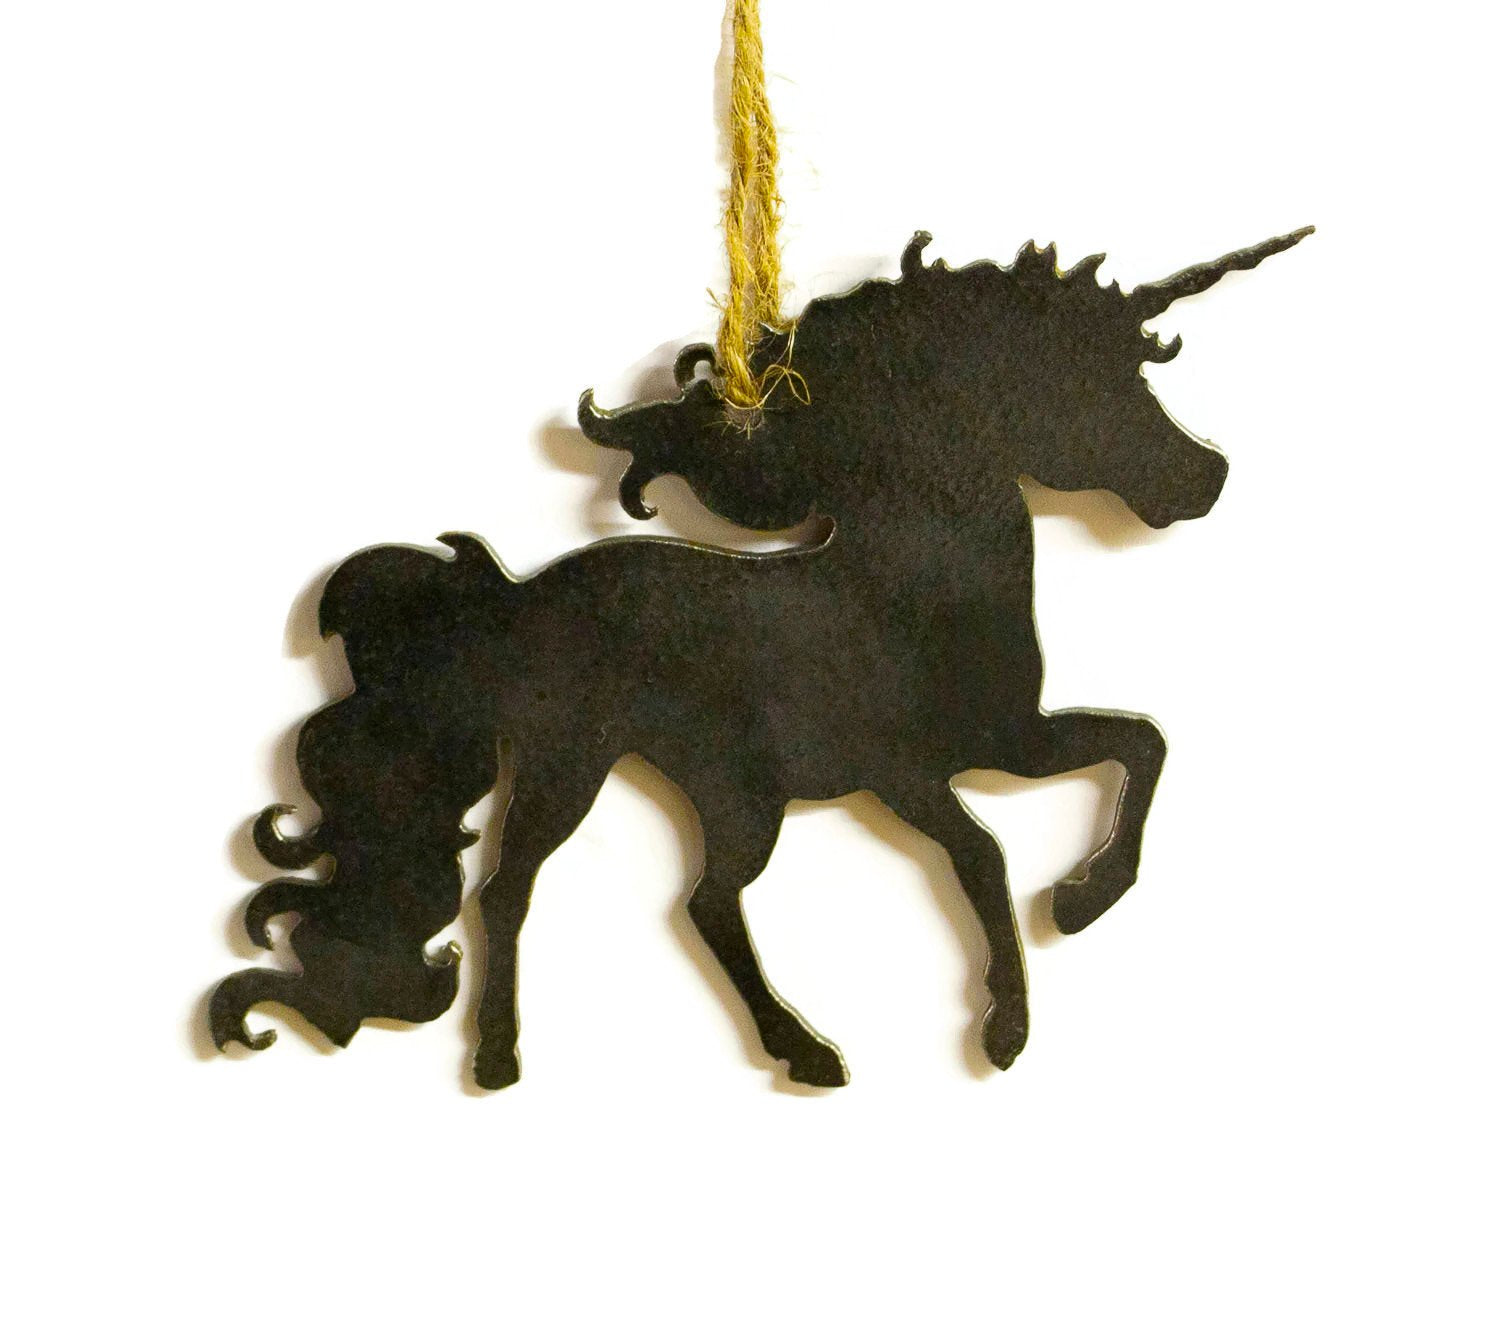 Unicorn Fantasy Metal Christmas Ornament Tree Stocking Stuffer Party Favor Holiday Decoration Raw Steel Gift Recycled Nature Home Decor